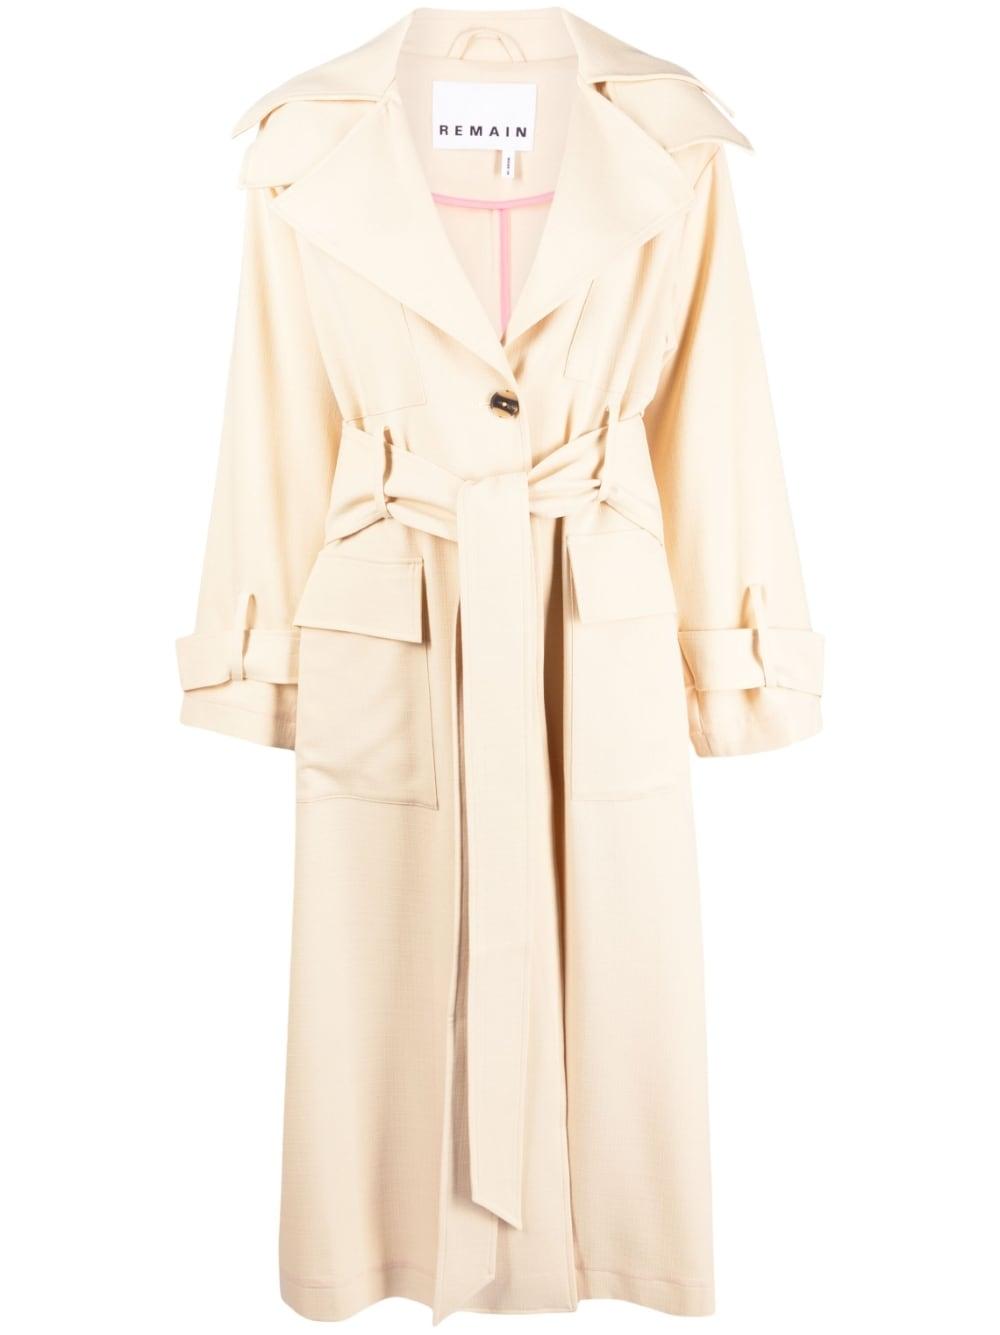 Remain Belted Trench Coat in Natural | Lyst